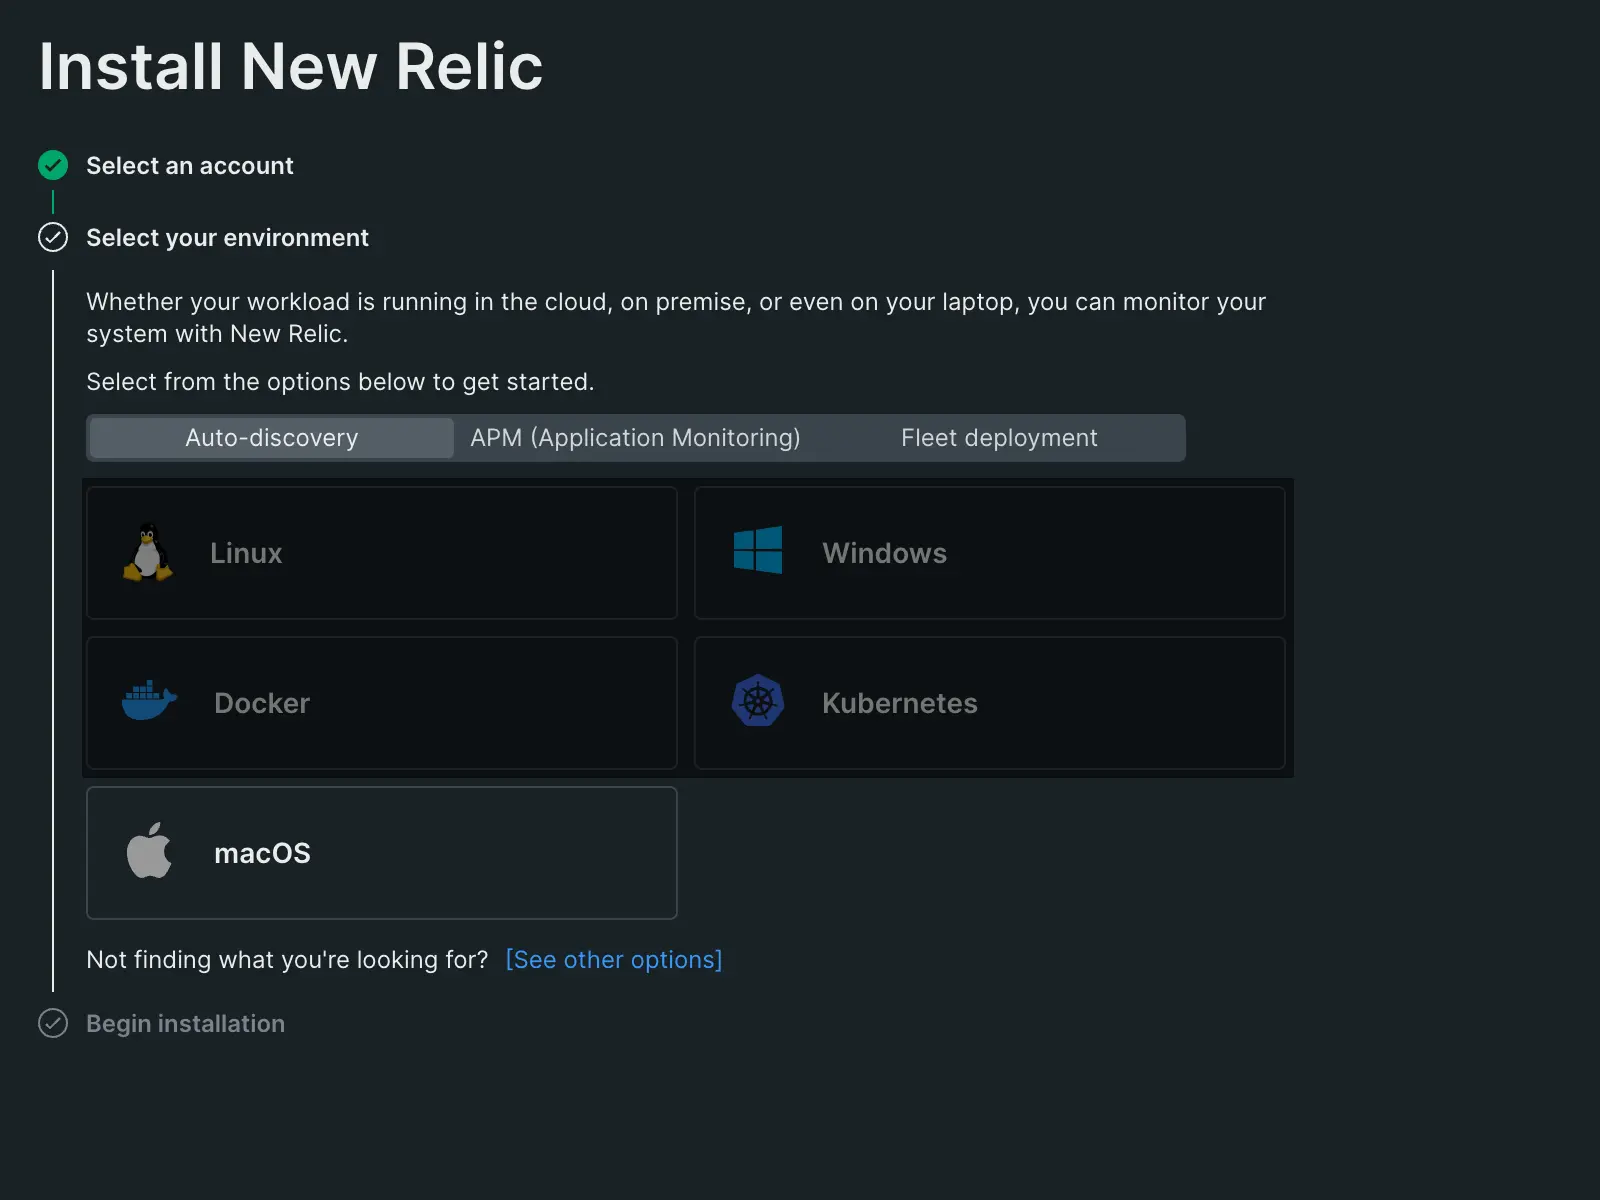 An image displaying New Relic's guided installation for macOS